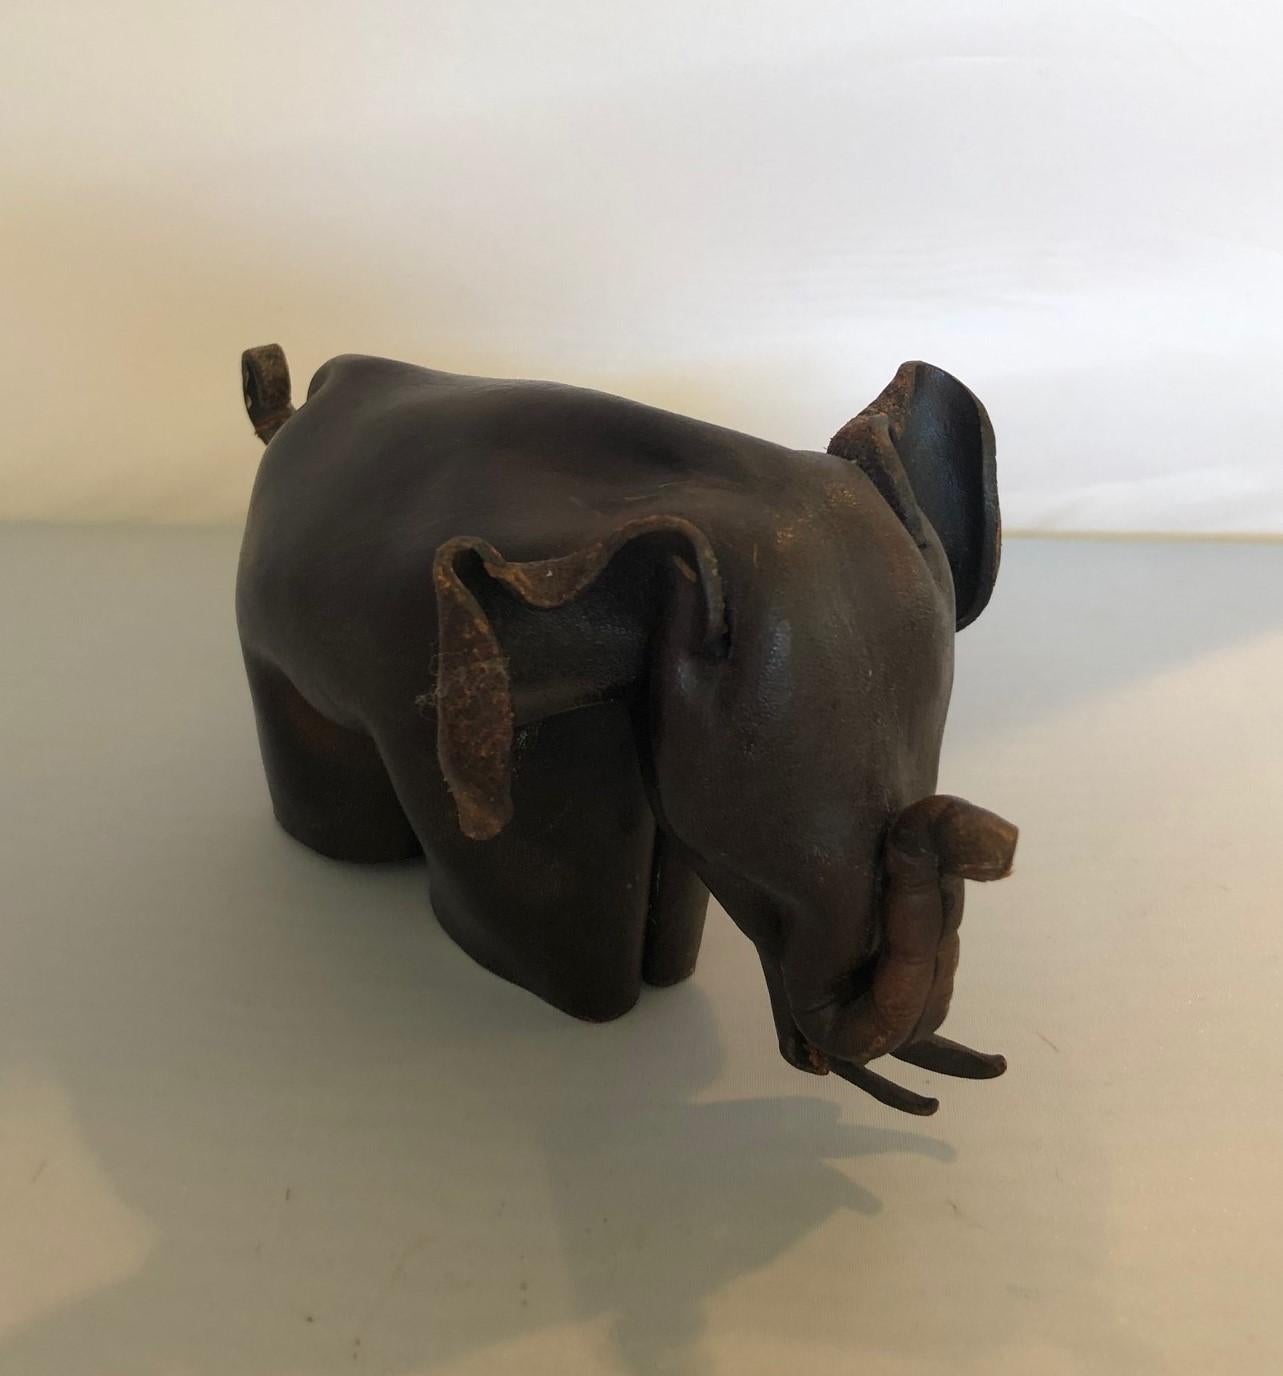 Rare Mid-Century Modern leather origami elephant sculpture, circa 1960s. The piece is made from one piece of leather that has been folded and manipulated to form an elephant. It is in the style of Deru and made in England (stamped on his right rear